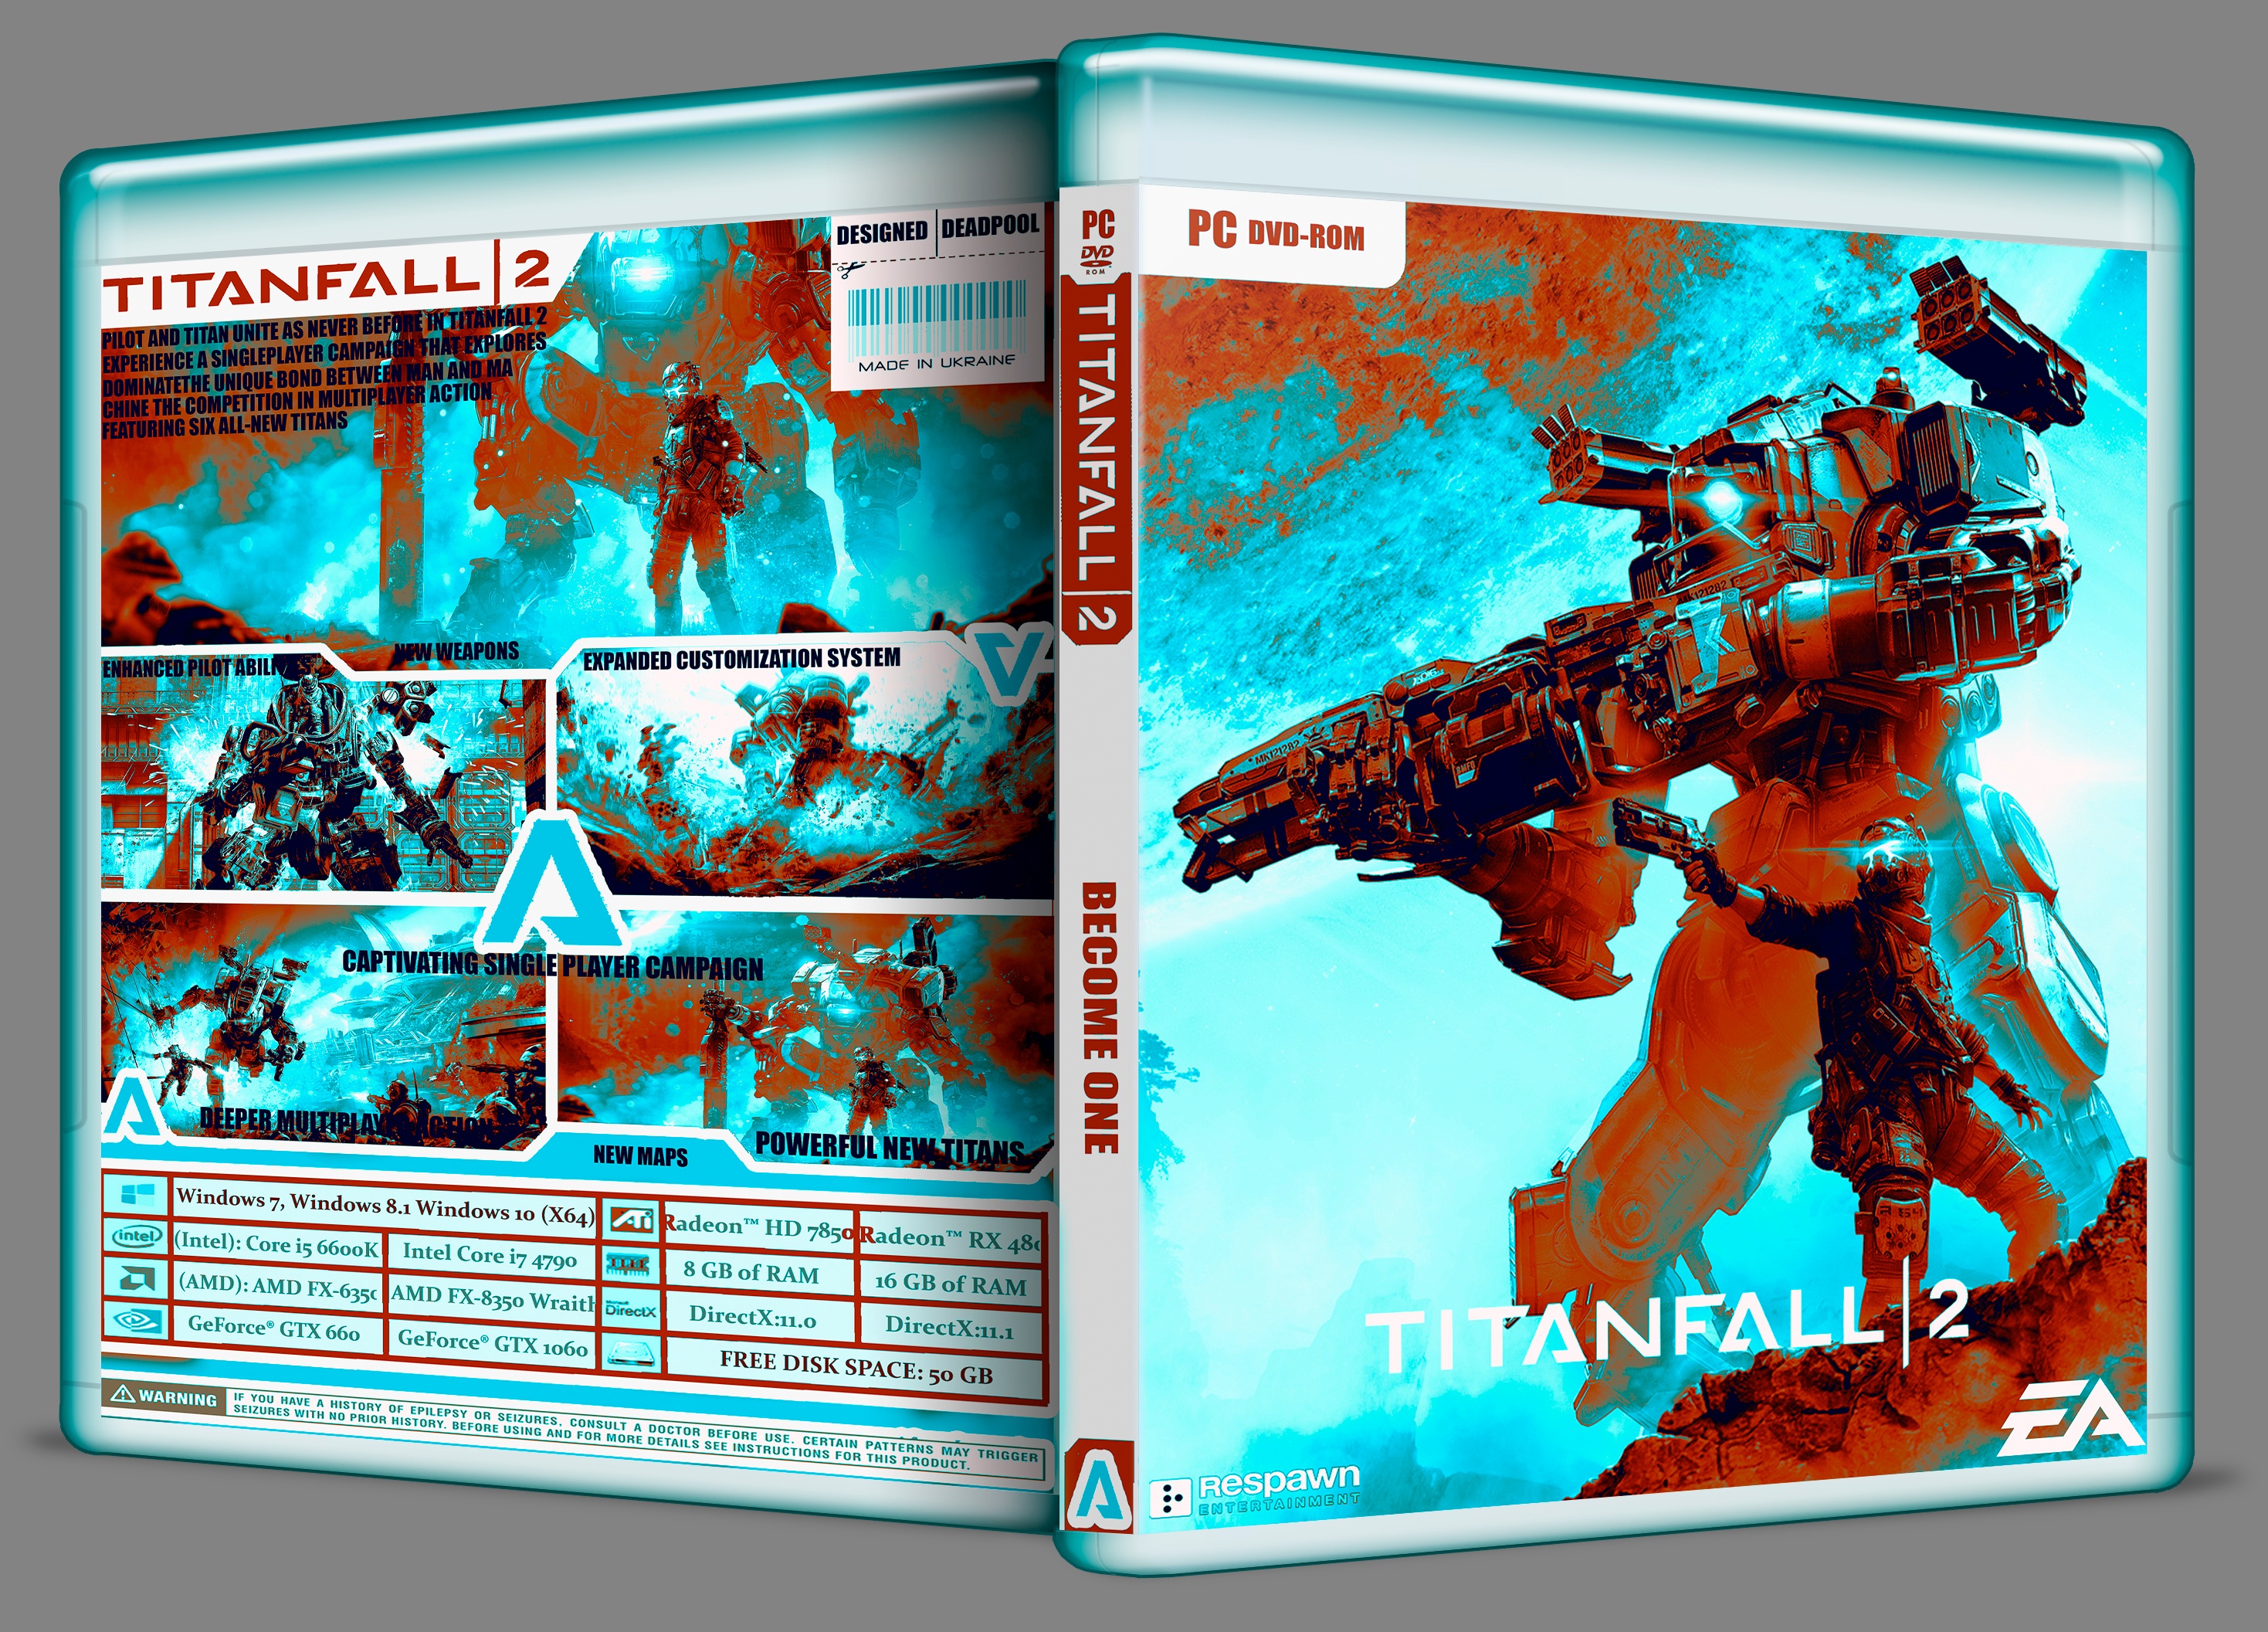 TITANFALL 2 box cover